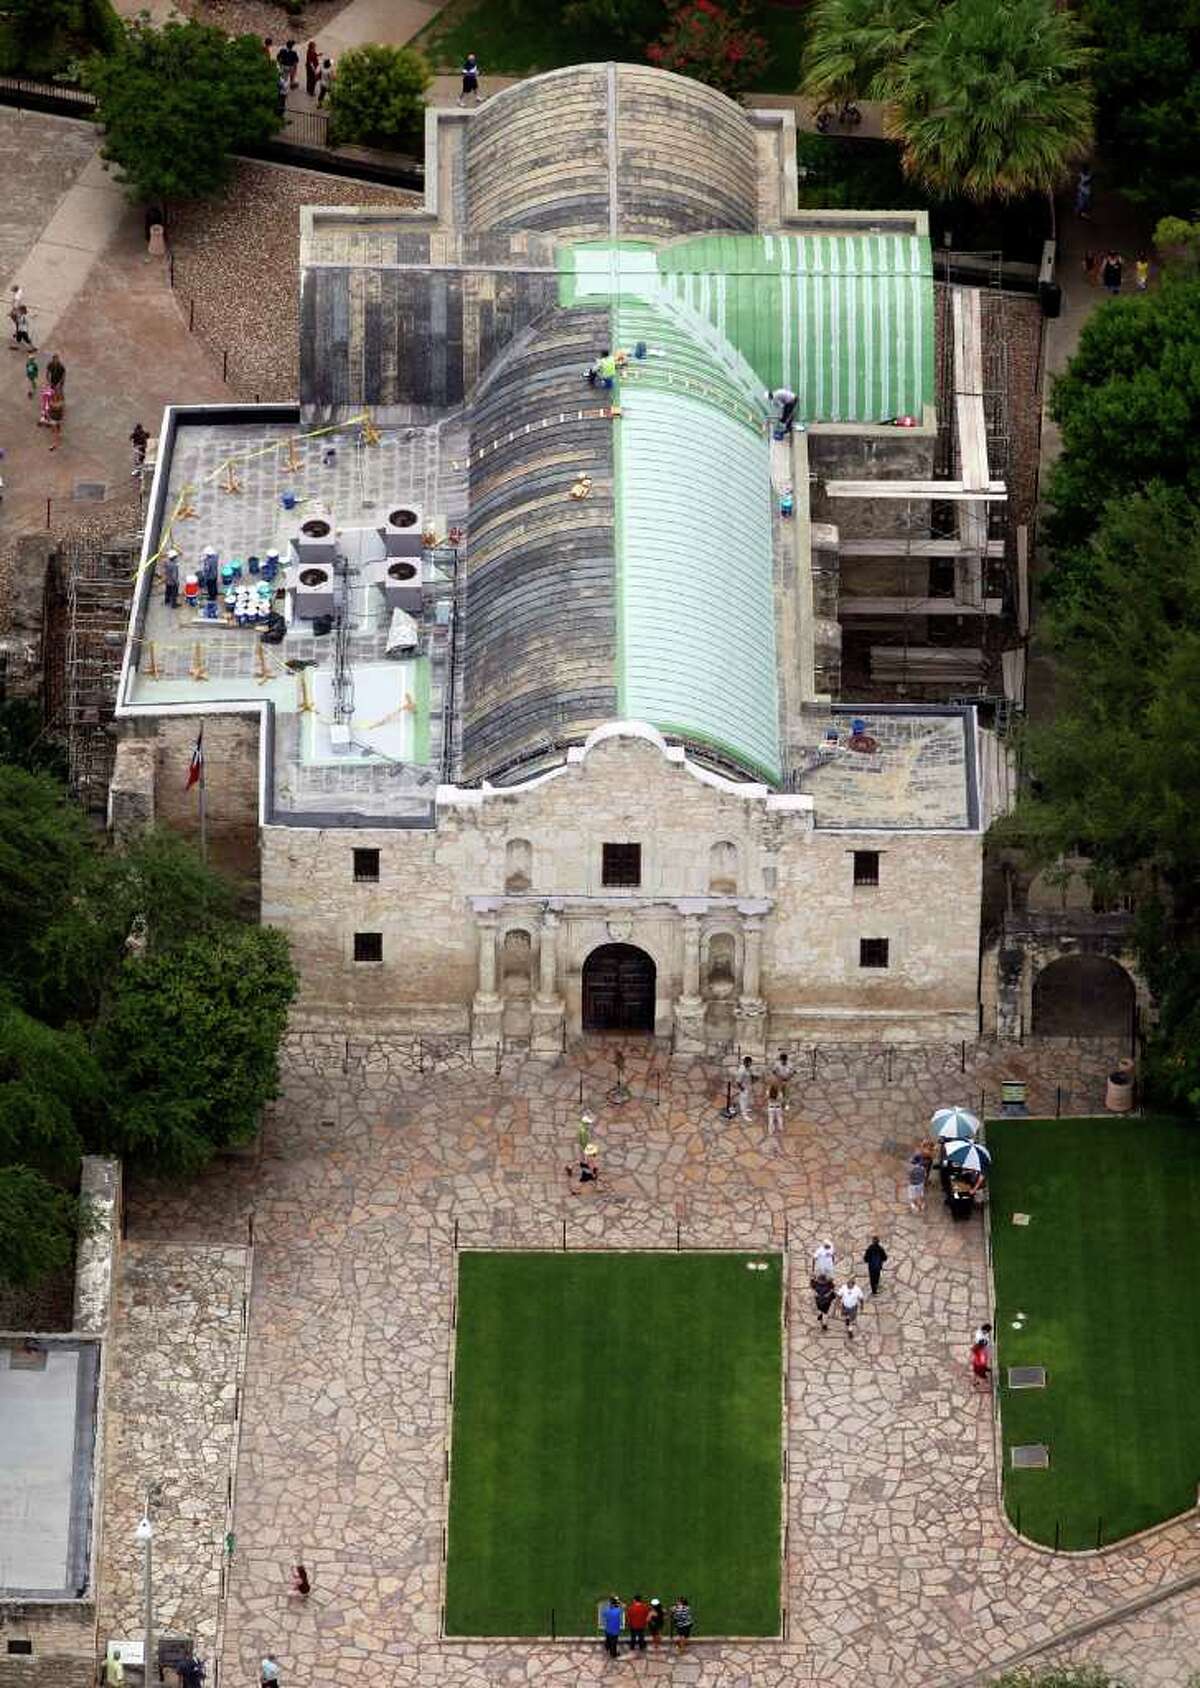 This summer, workers at the Alamo applied an acrylic waterproofing product called Hydro-Stop to the vaulted portion of roof's exterior to control leaks. An engineer's report called water intrusion the "single largest threat to the continued viability of the Alamo structure."